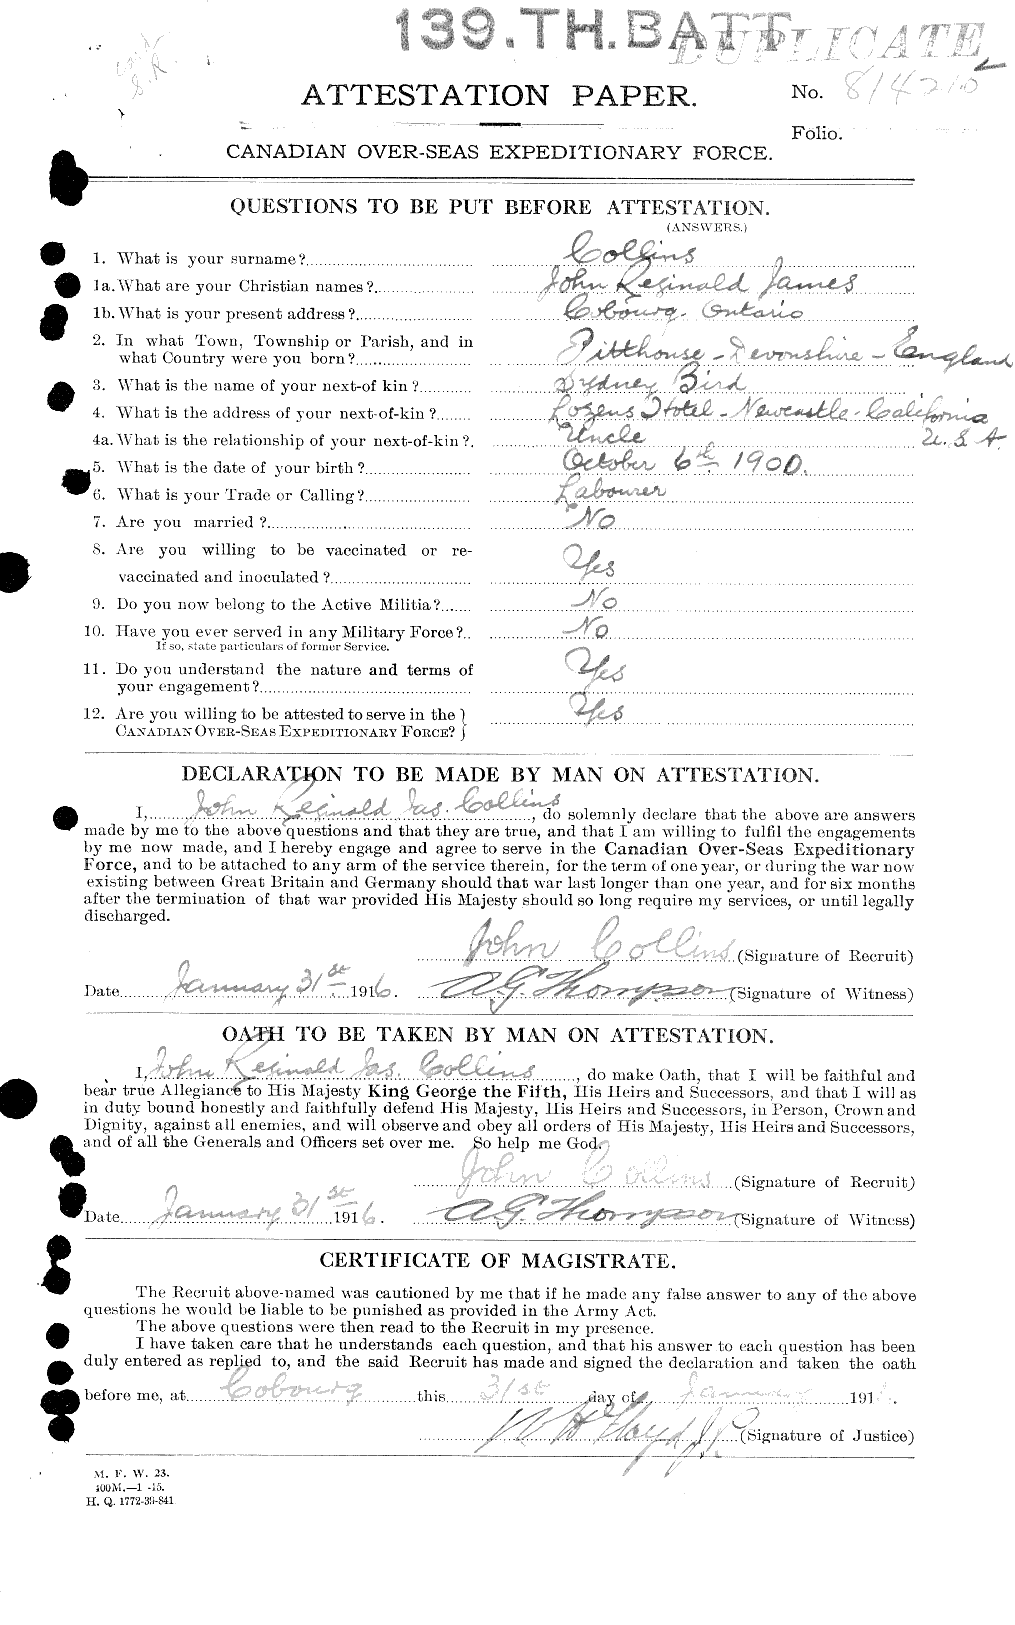 Personnel Records of the First World War - CEF 034380a